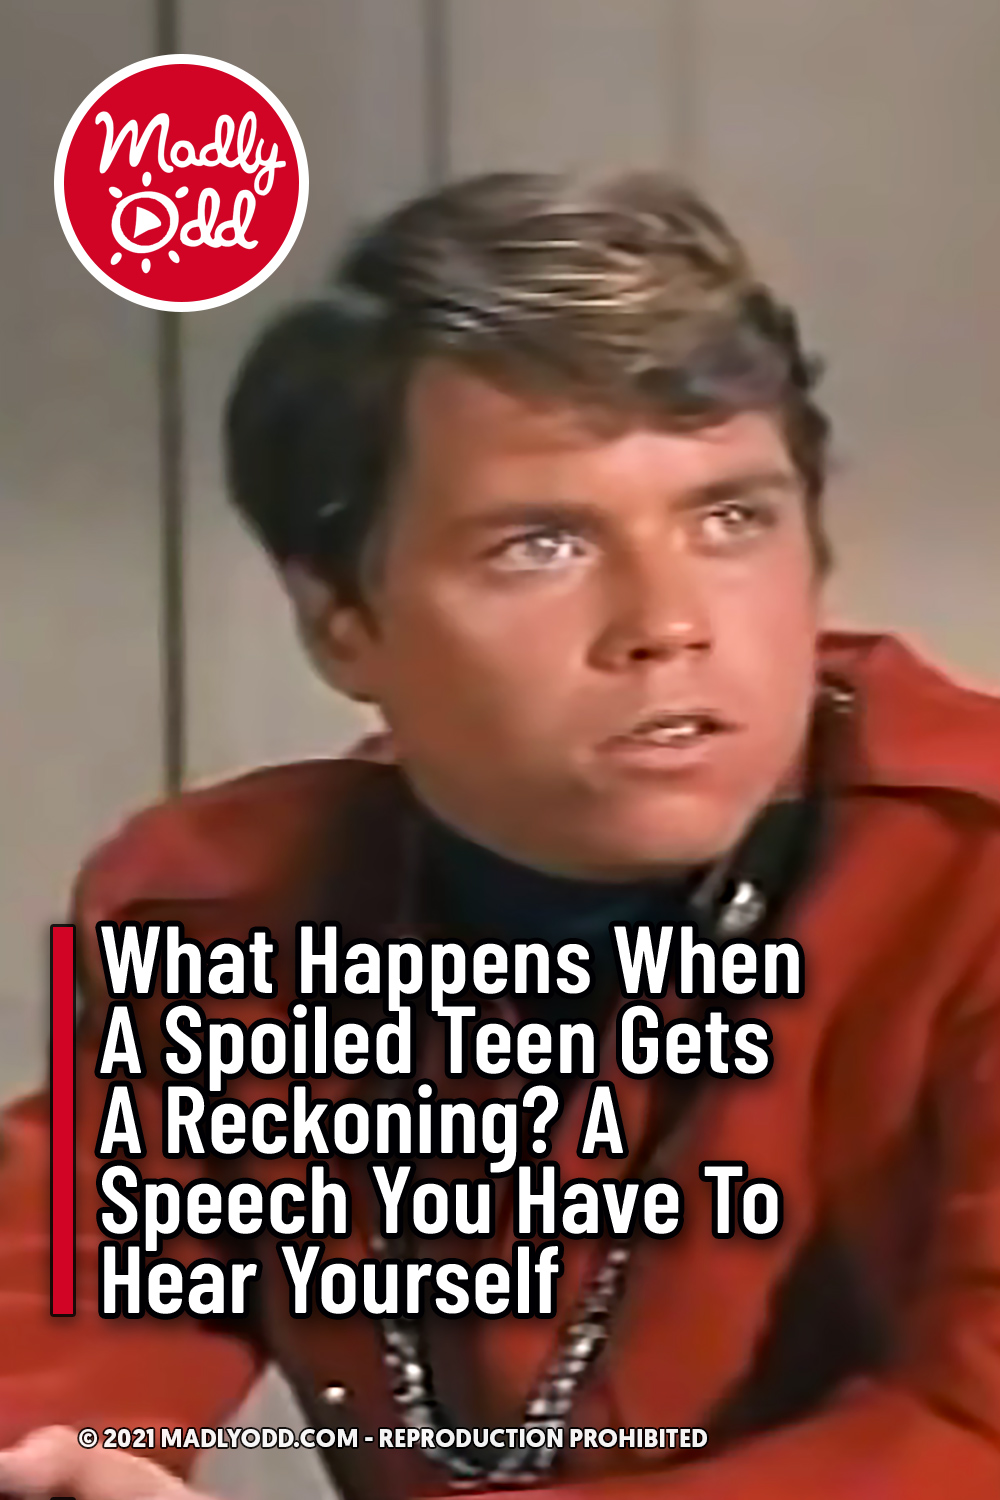 What Happens When A Spoiled Teen Gets A Reckoning? A Speech You Have To Hear Yourself